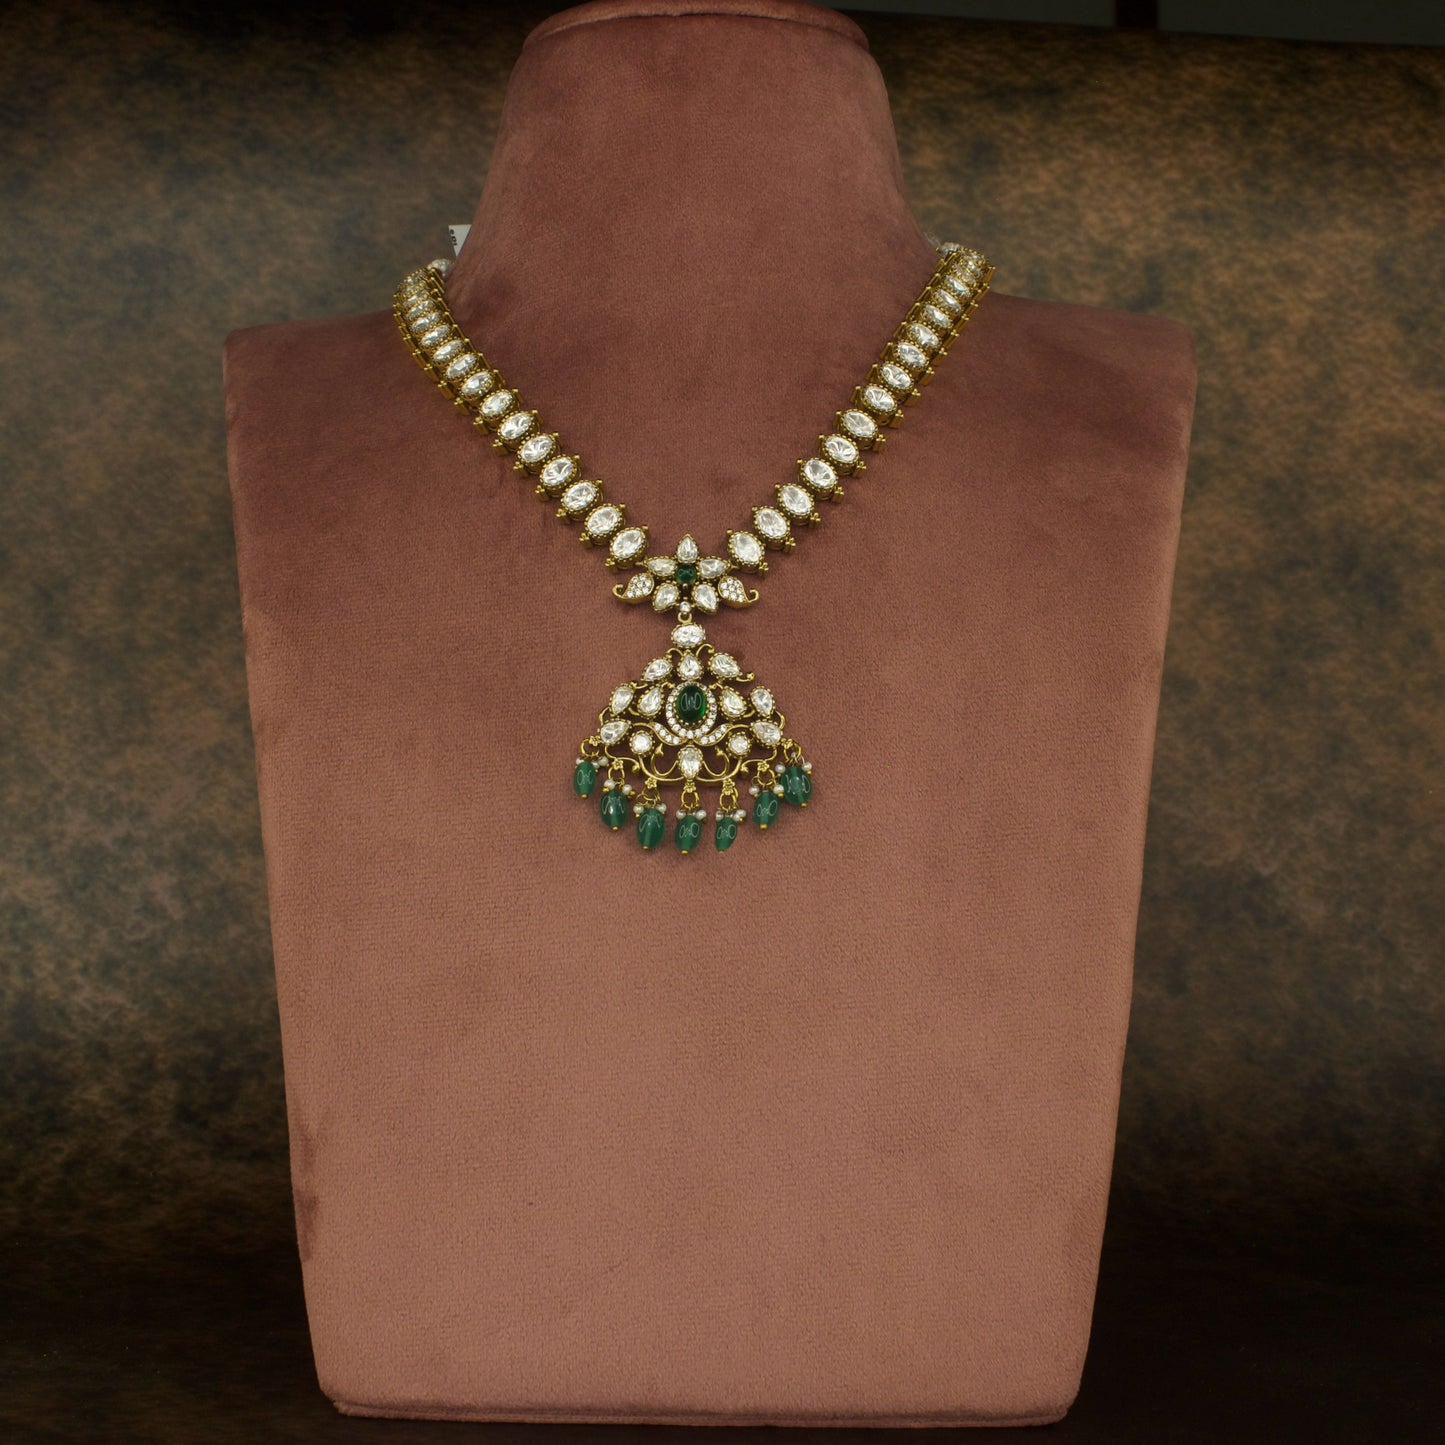 Single Layer Polki Victorian Necklace Setwith High Quality Victorian Finish. This product belongs to Victorian Jewellery category